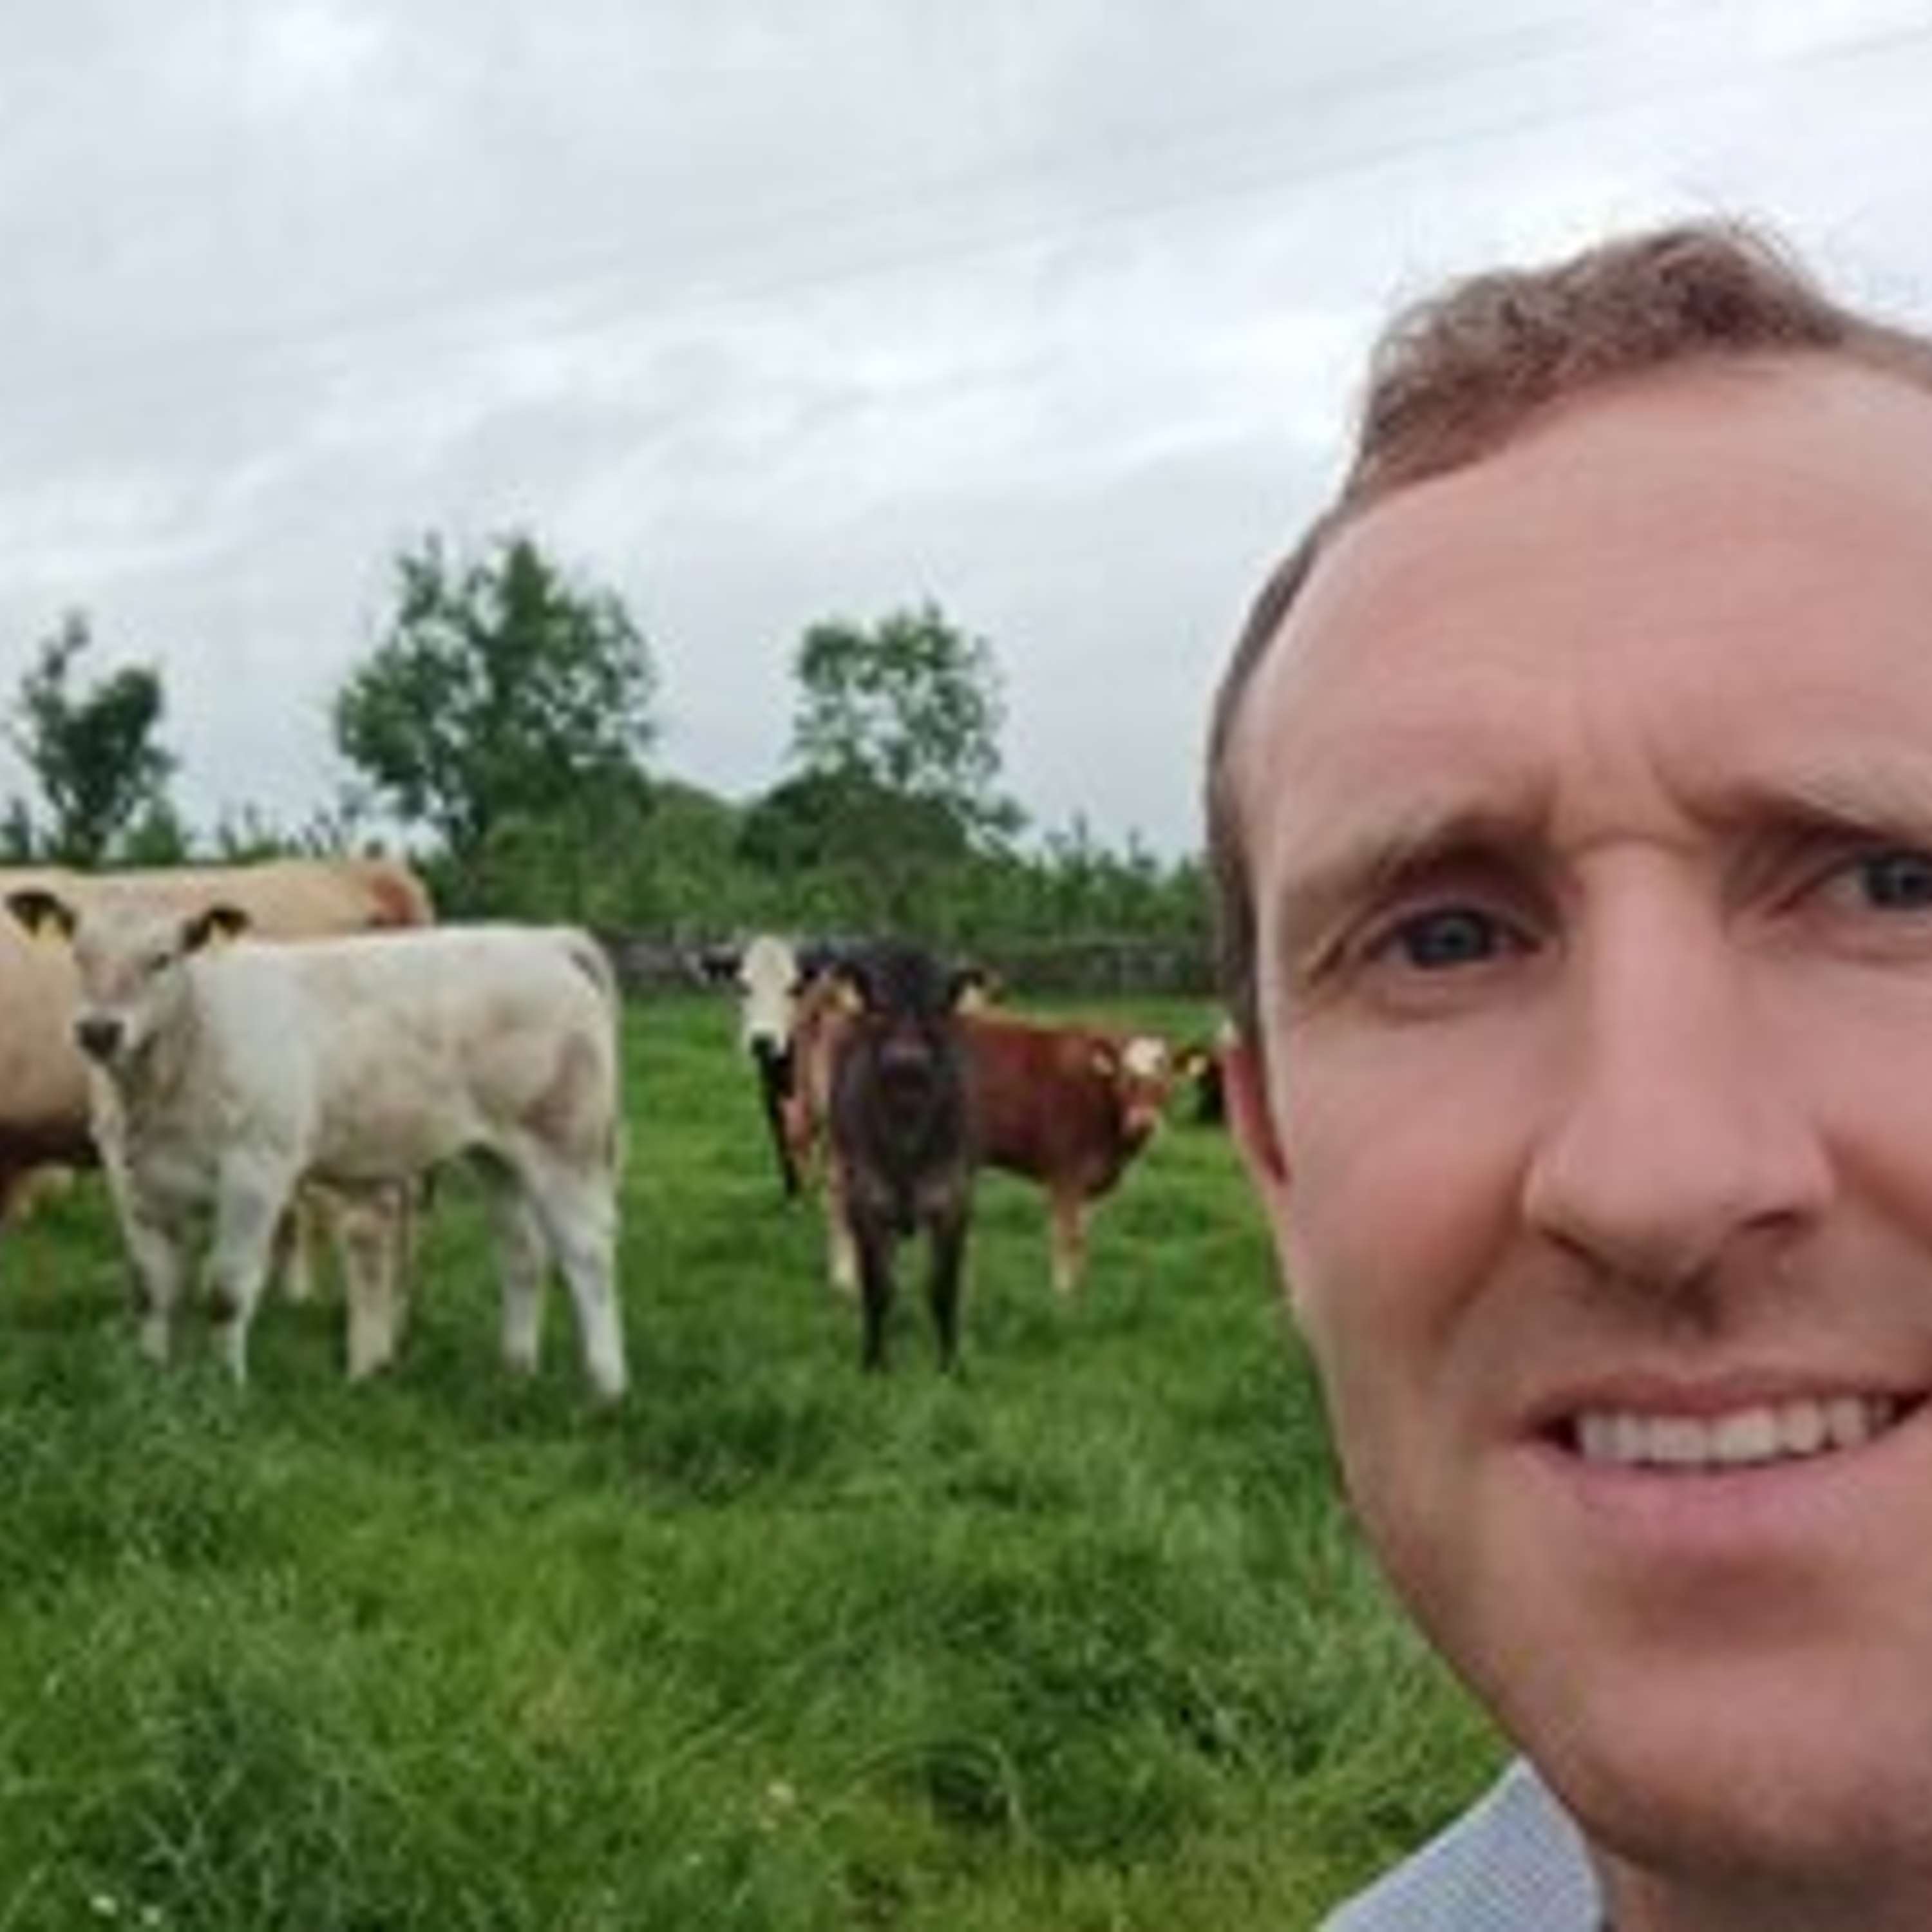 Galway farmer, Aonghusa Fahy on preparing for calving, calving the cow and caring for the newborn calf